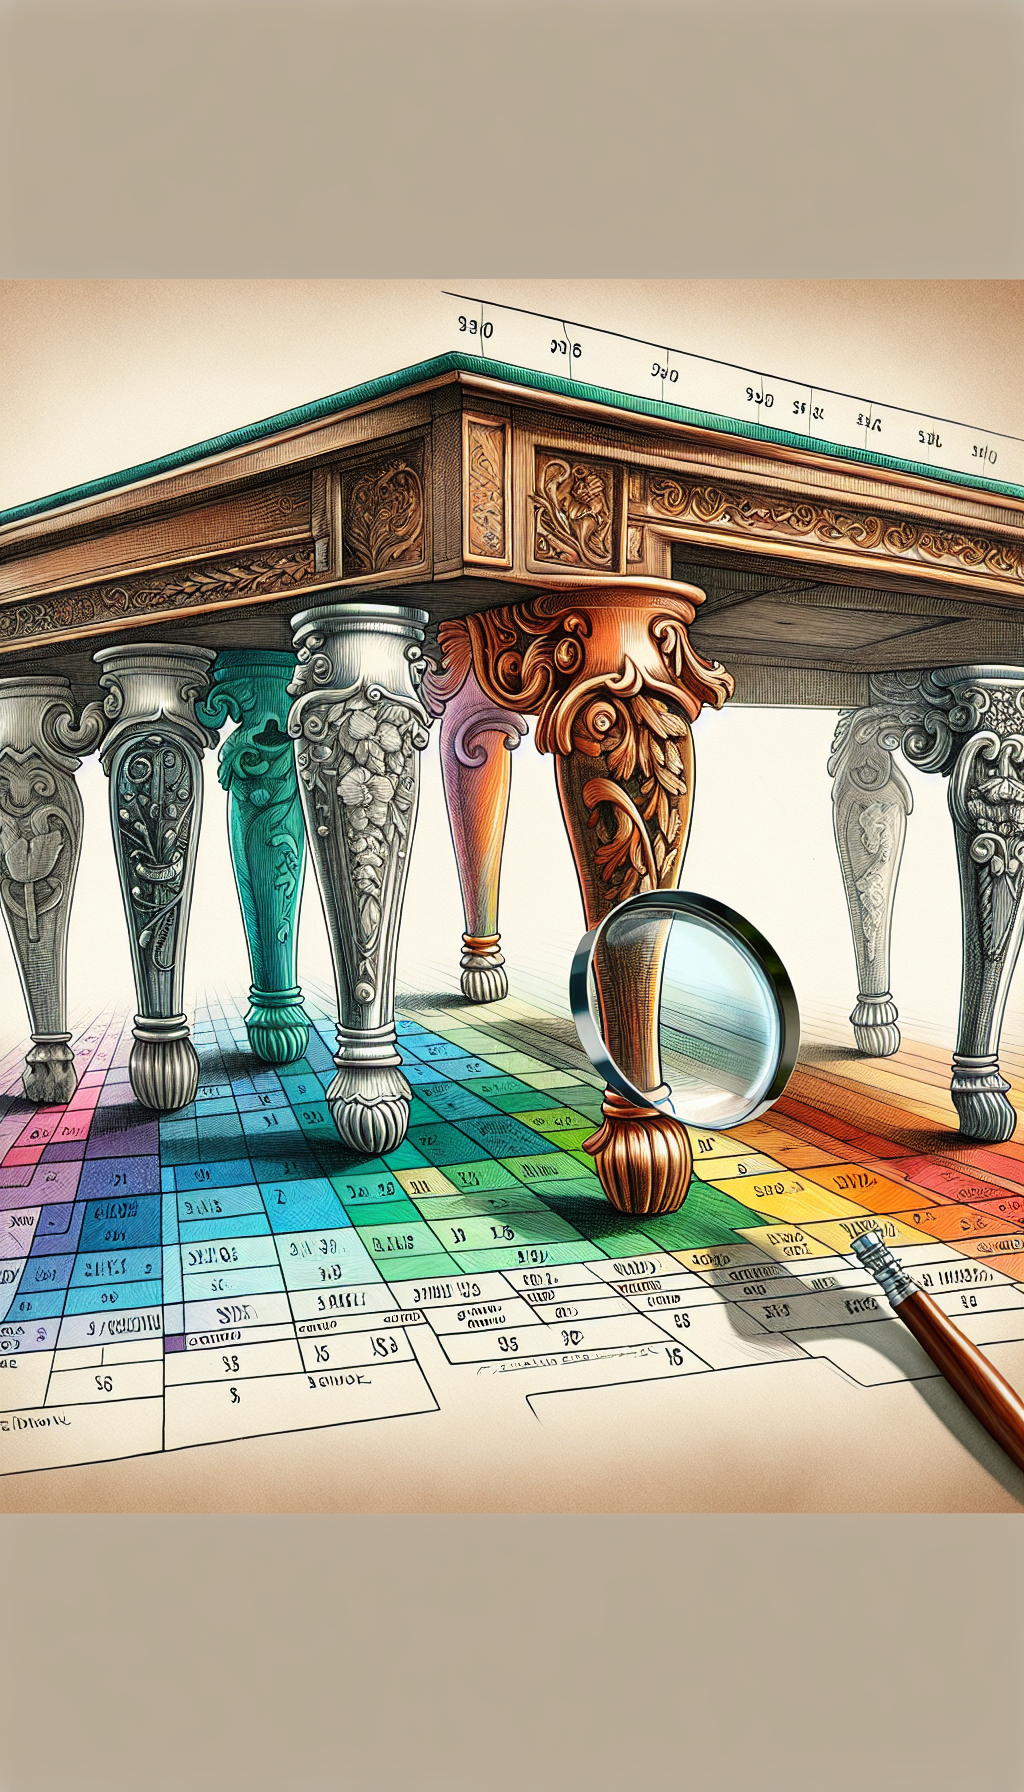 An intricately sketched quartet of cabriole legs gracefully supports a transparent antique table-top, through which a timeline flows on its surface, denoting key historical periods. Each leg is adorned with period-specific details like carvings and foot styles, subtly color-coded to match the timeline. A magnifying glass hovers over one leg, hinting at the detective work involved in dating these elegant furnishings.